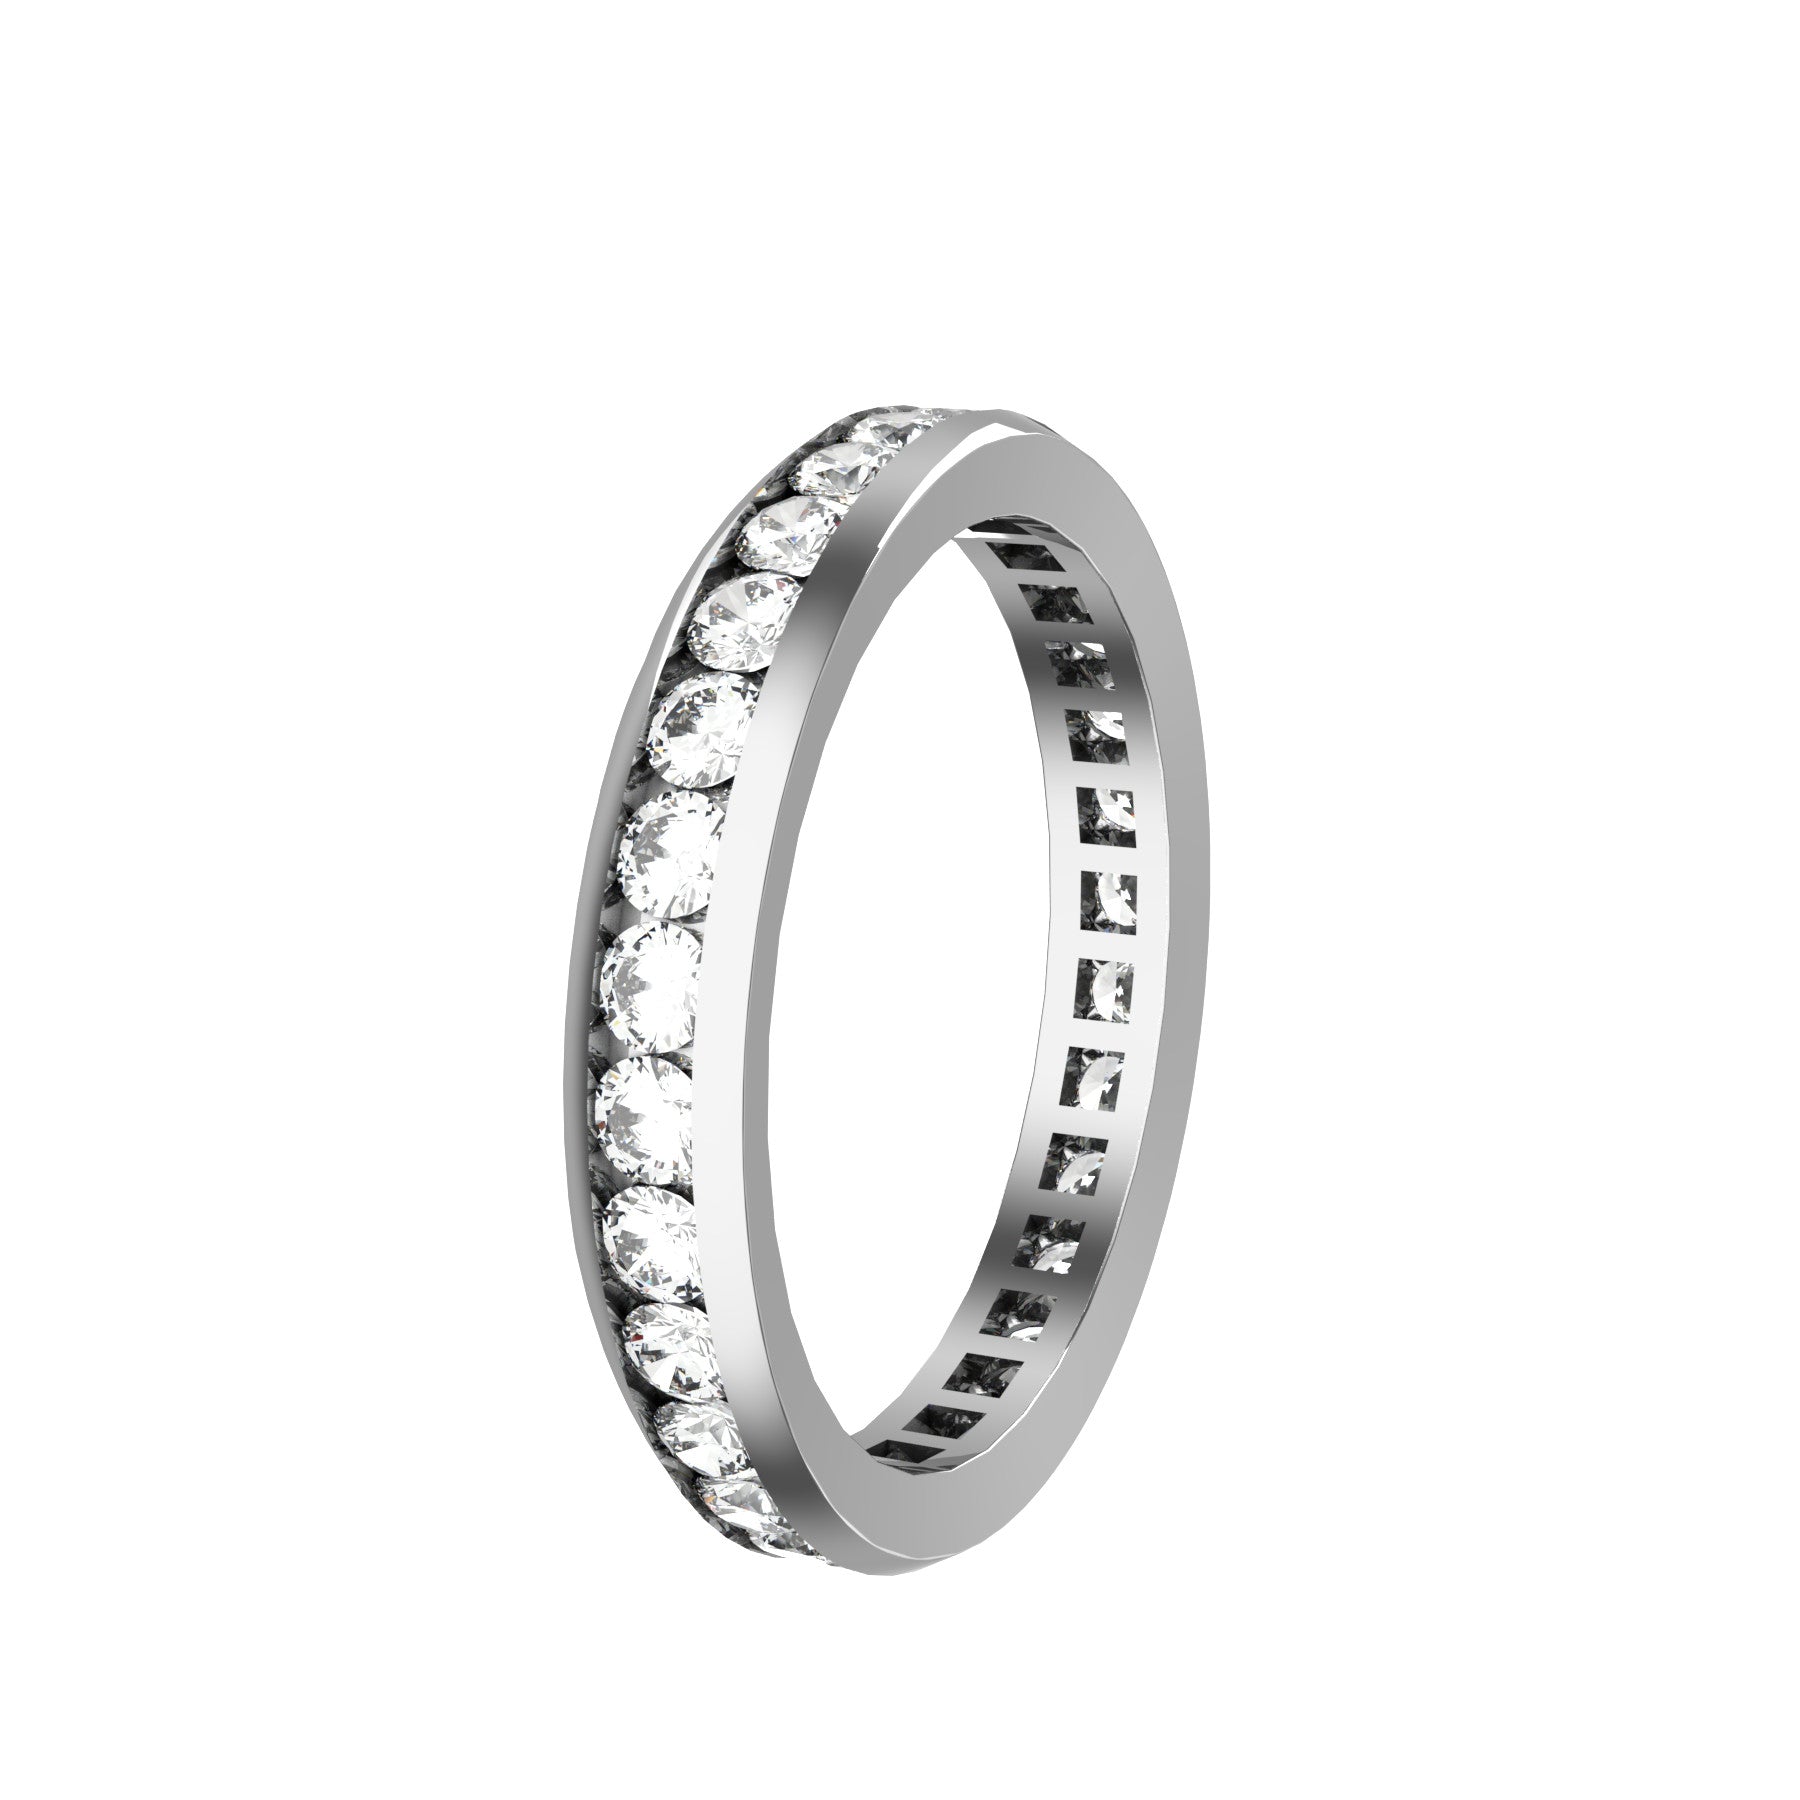  everlasting wedding band, 18 k white gold, 0,03 ct round natural diamonds, weight about 2,60 g. (0,09 oz), width 3,20 mm